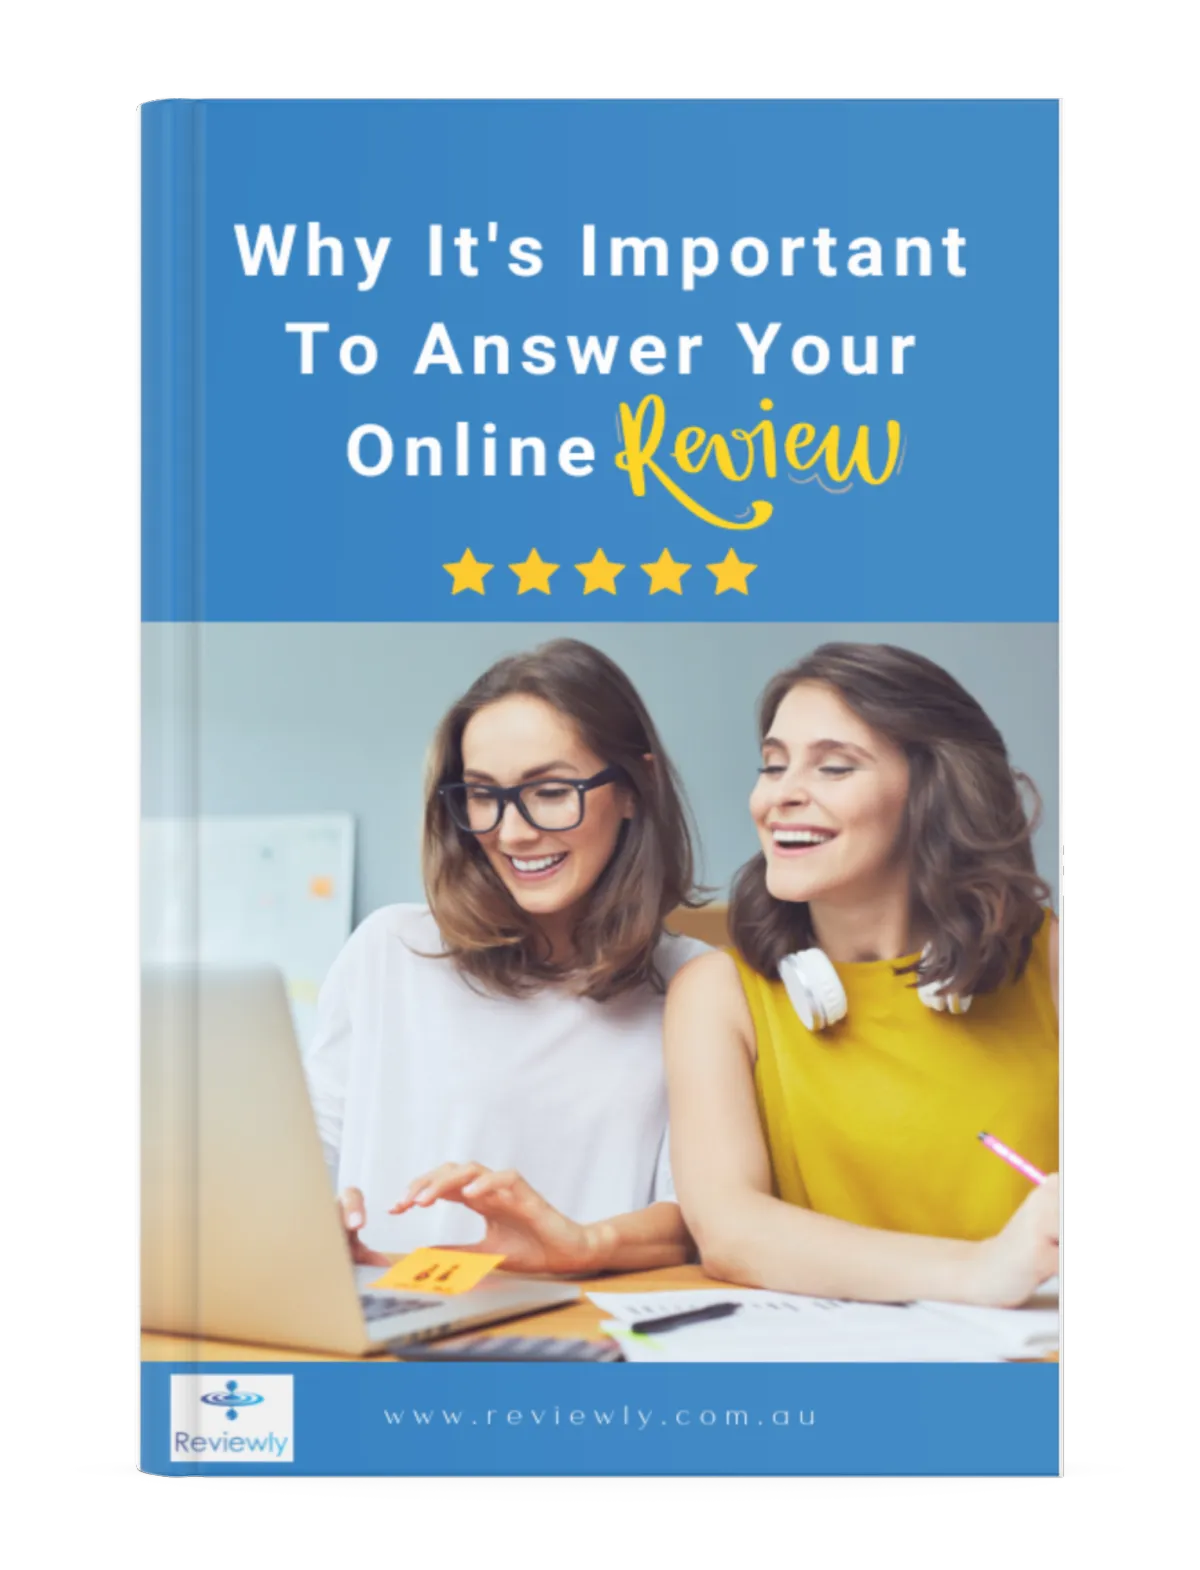 Why it's important to Answer Your Online Review